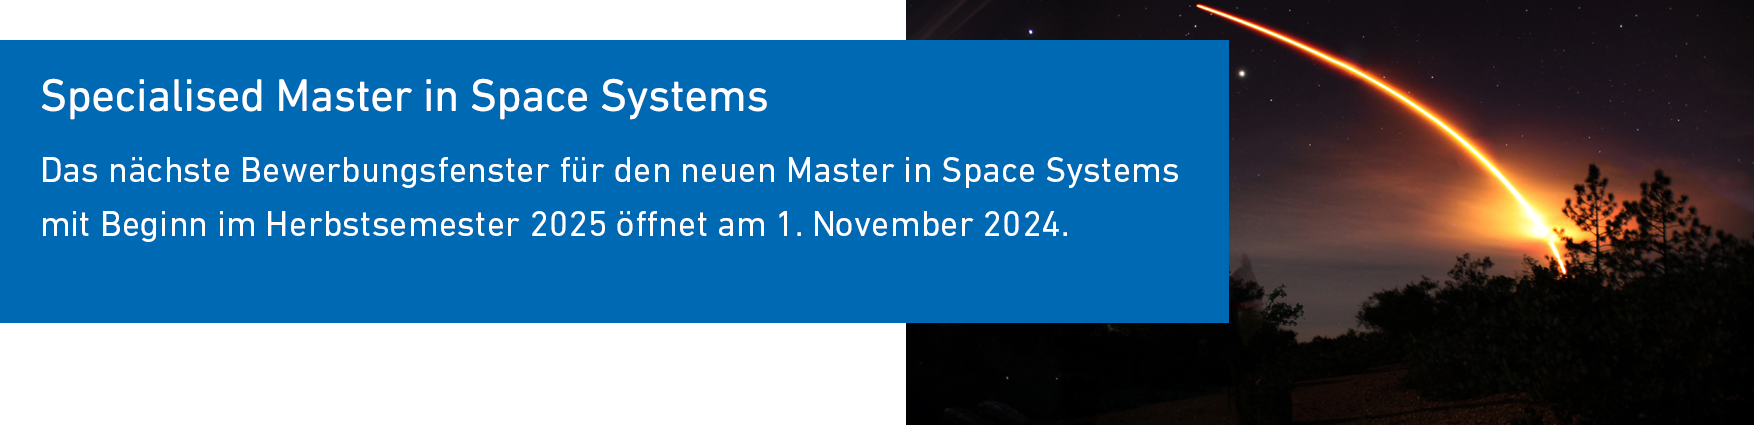 Specialised Master in Space Systems